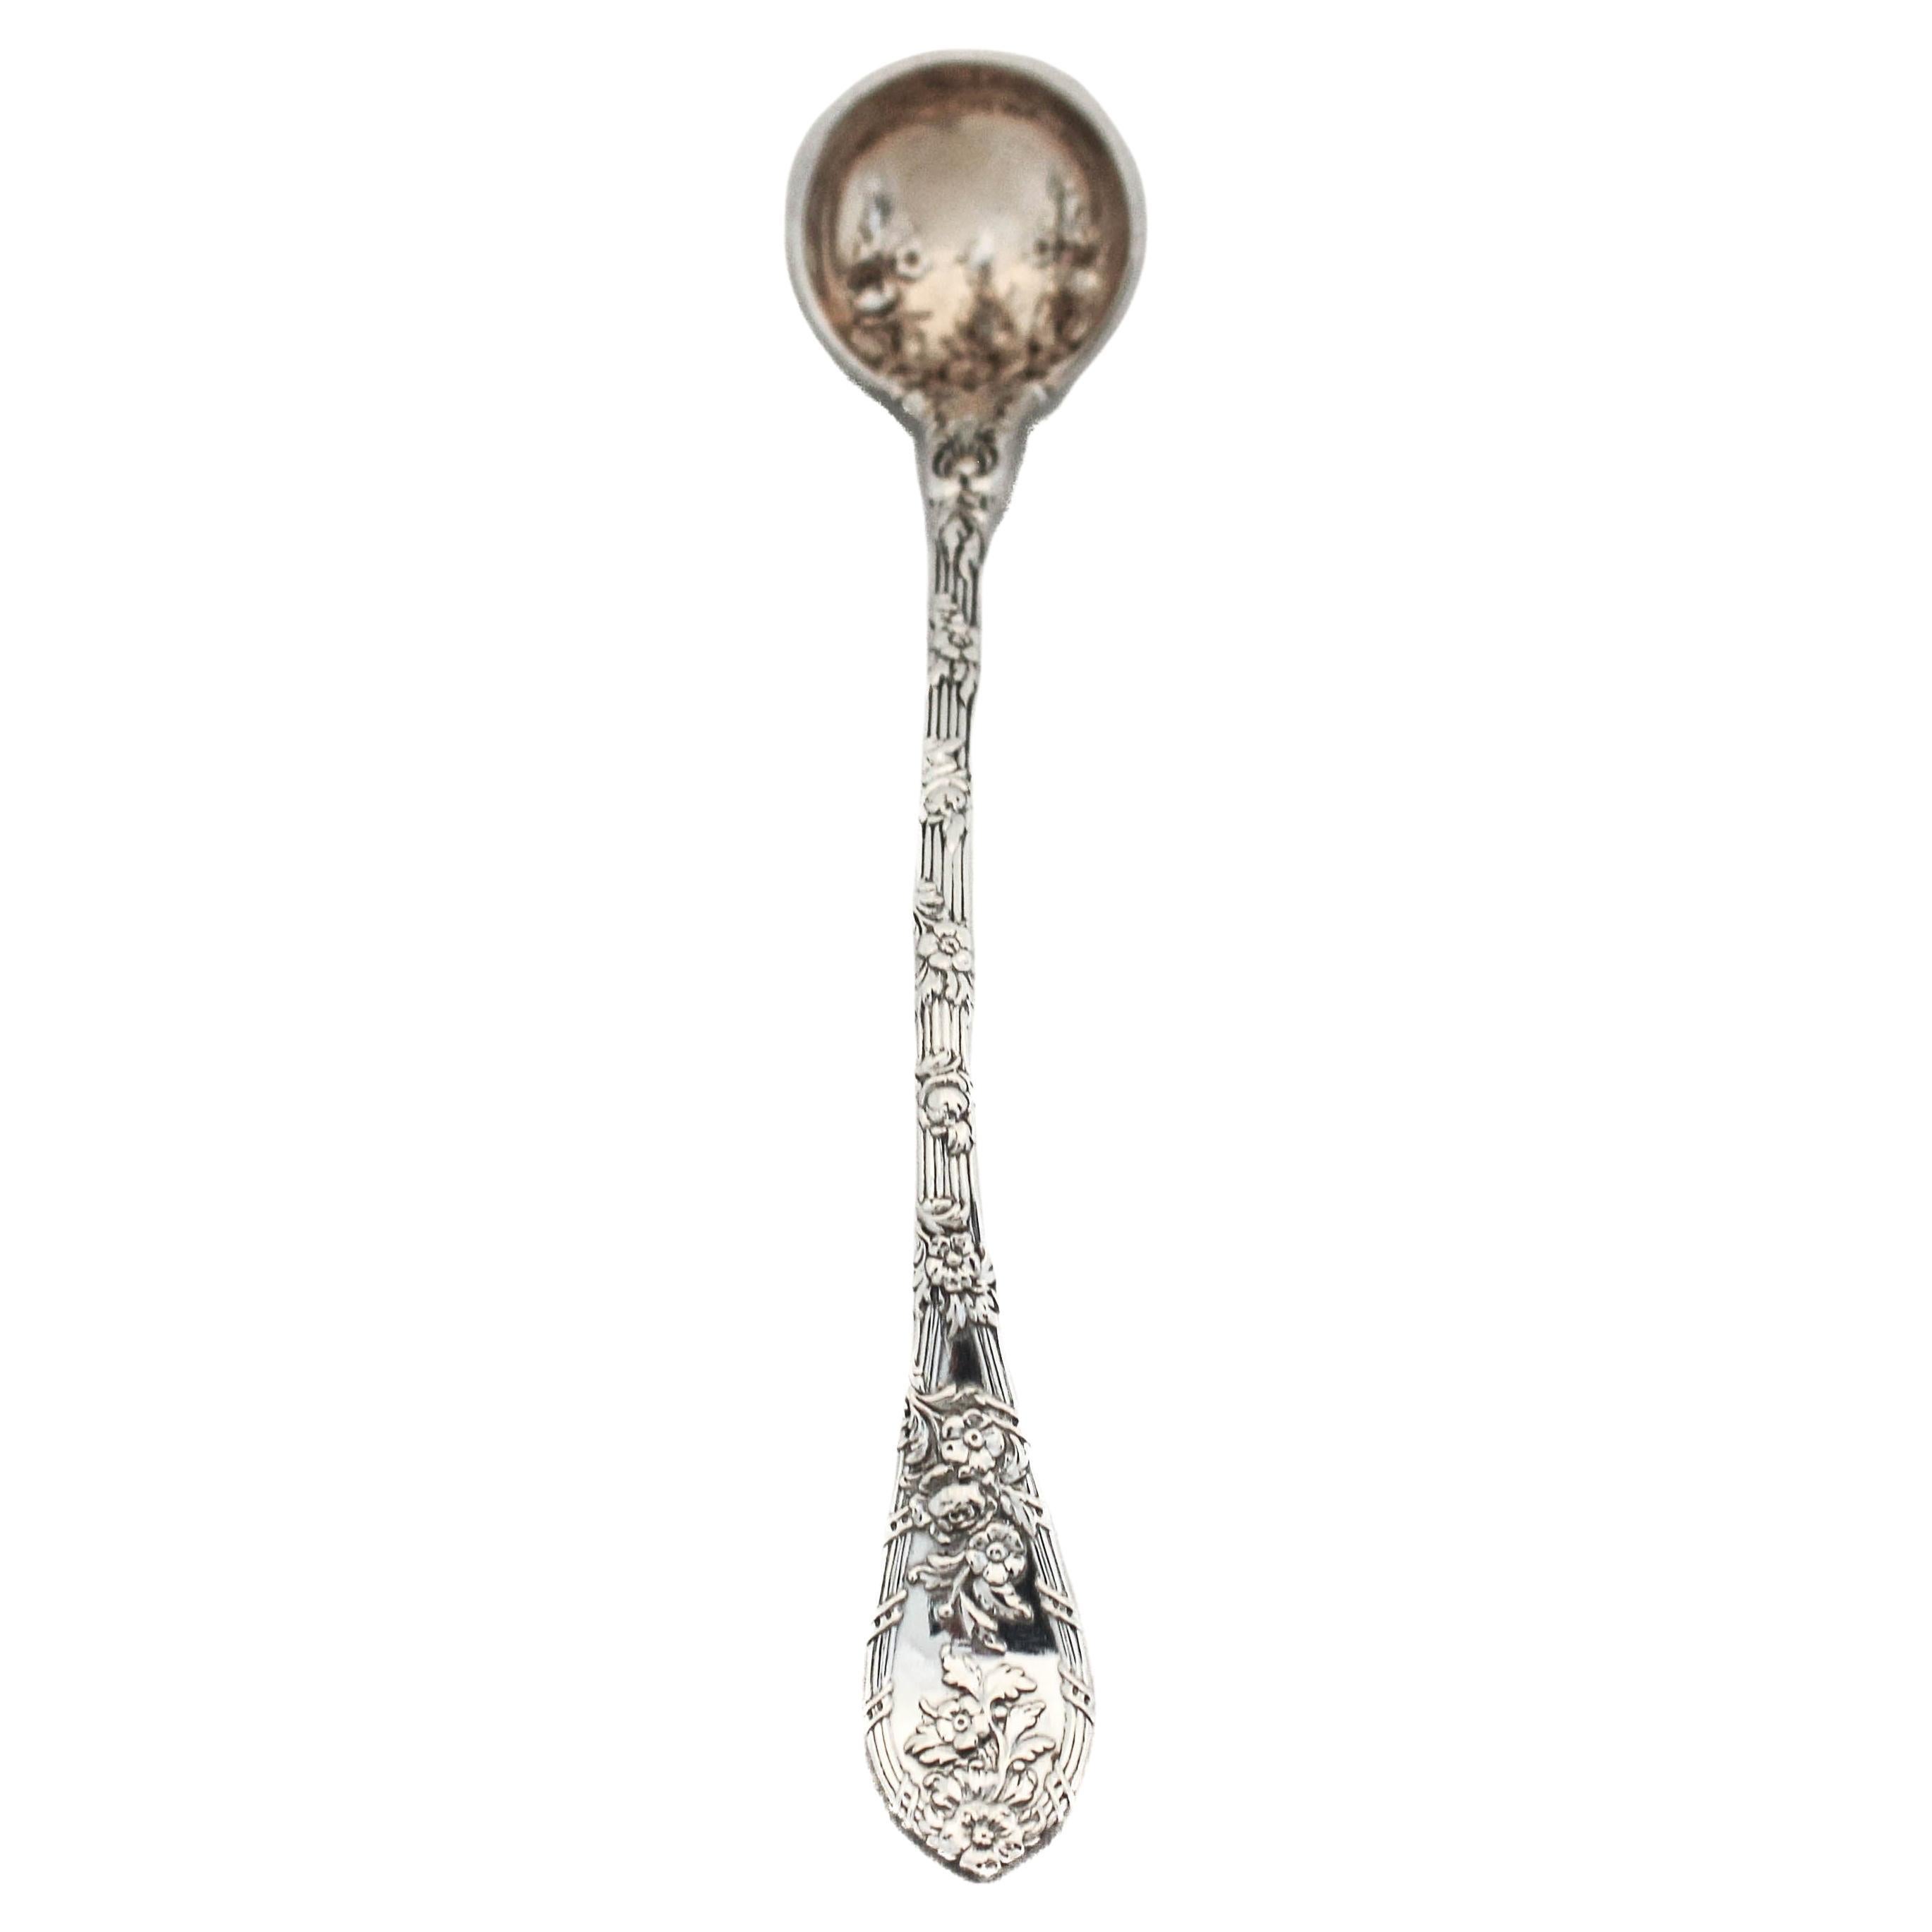 Dauphin Sterling Silver Mustard Ladle For Sale